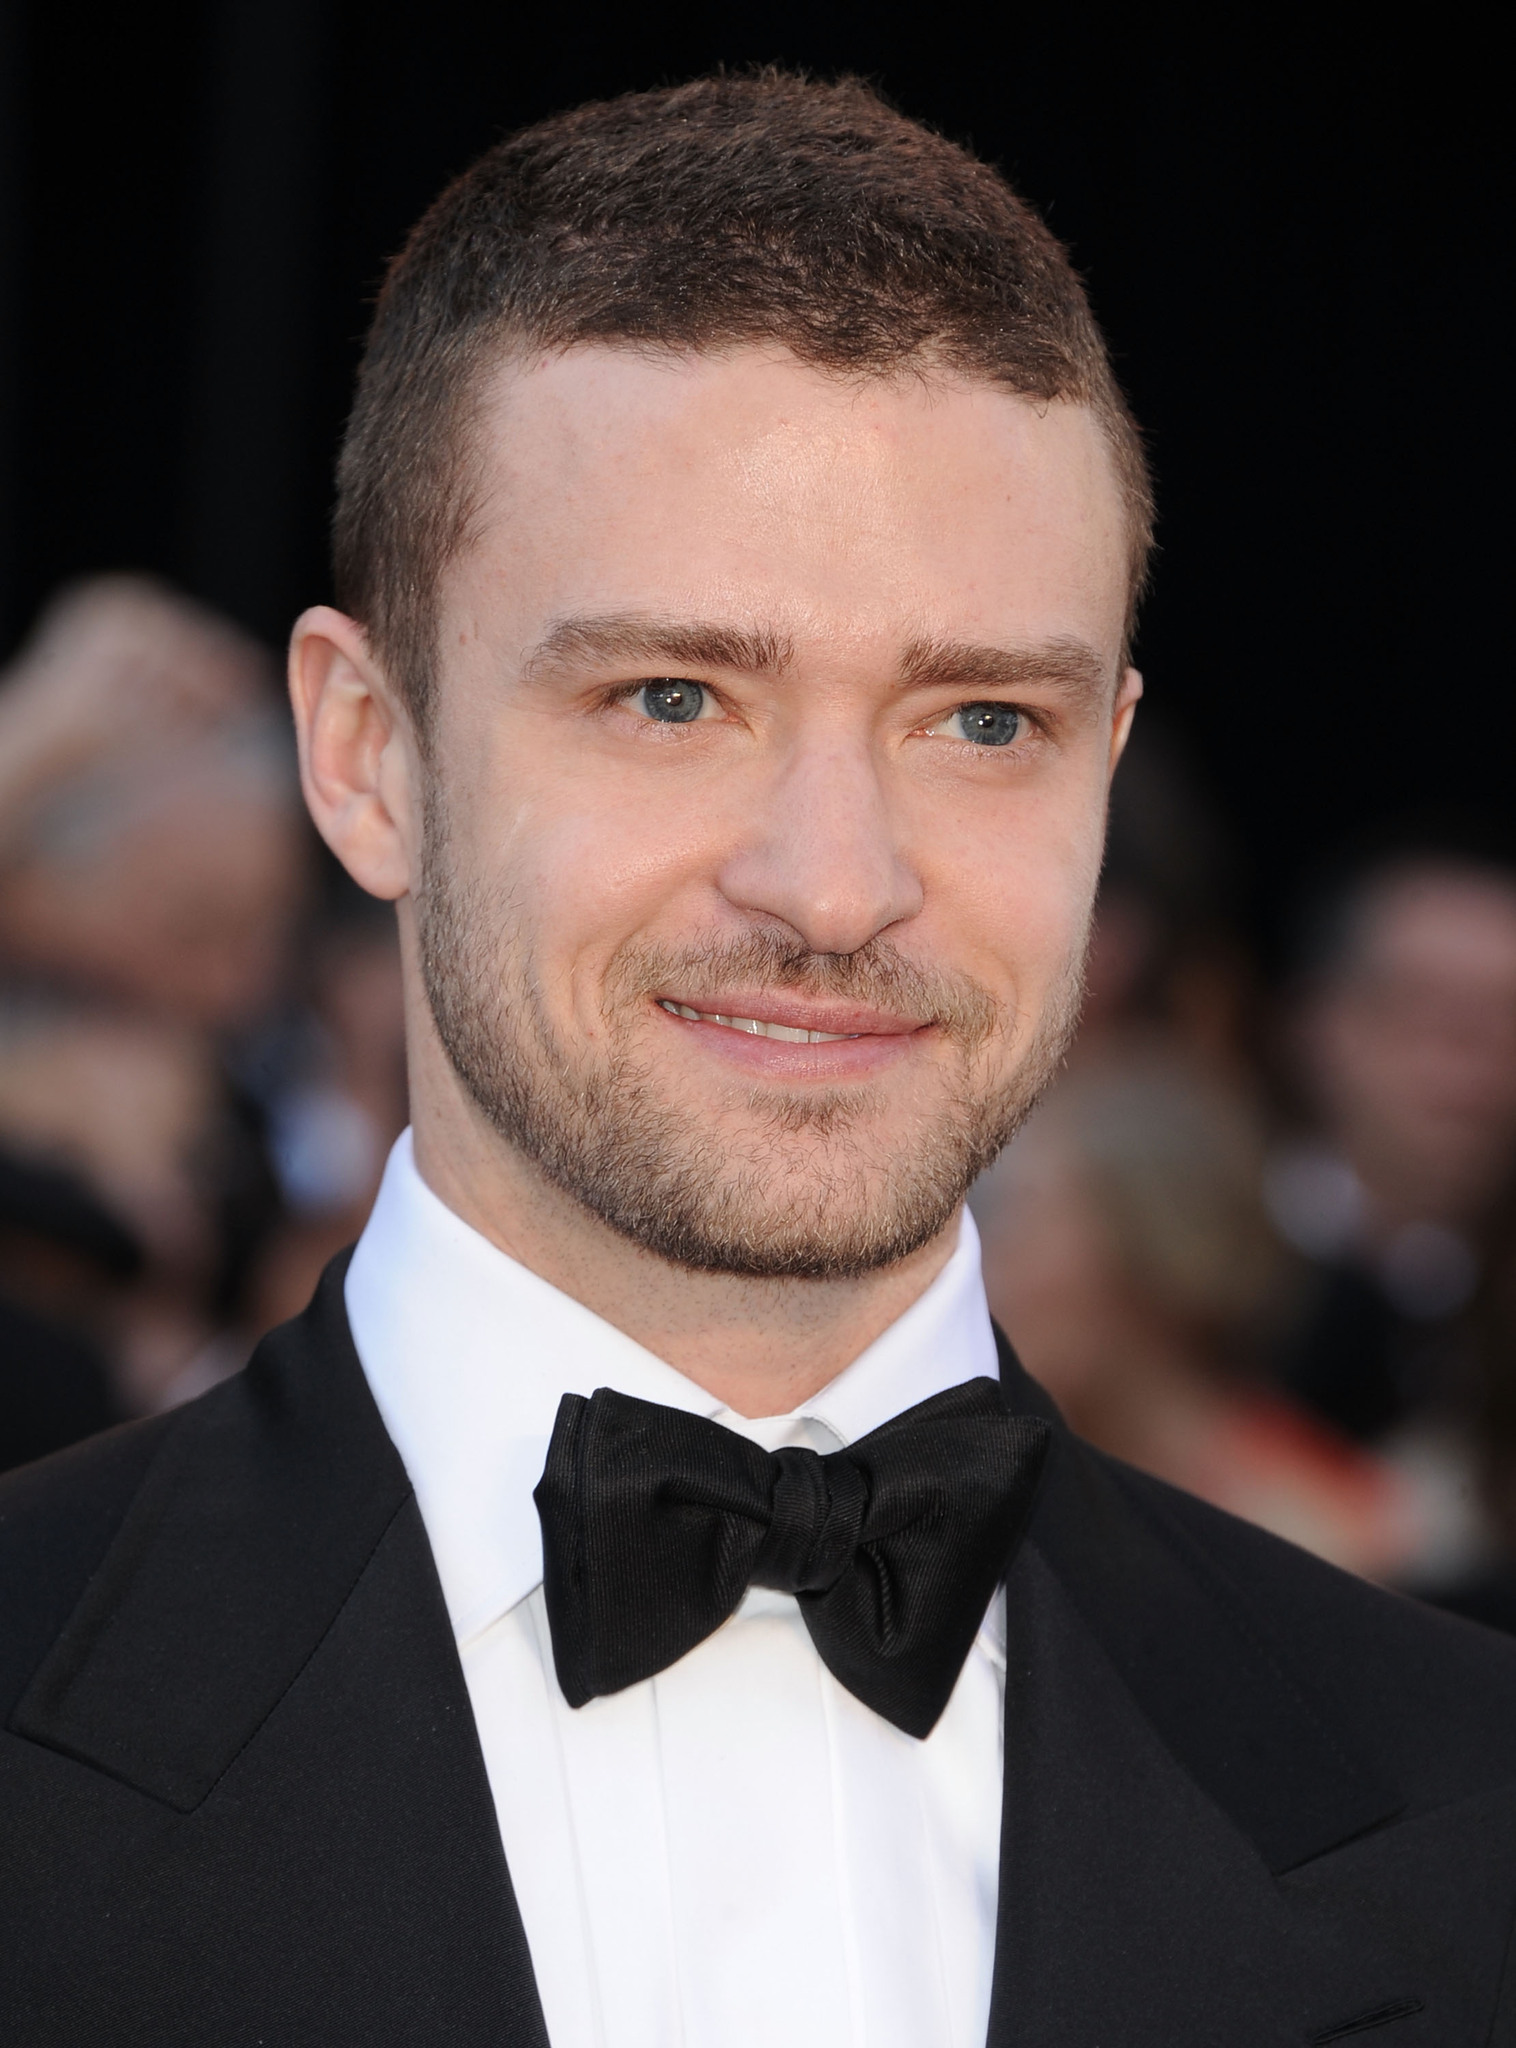 Justin Timberlake - His Success Story From Mickey Mouse Club To Superstar